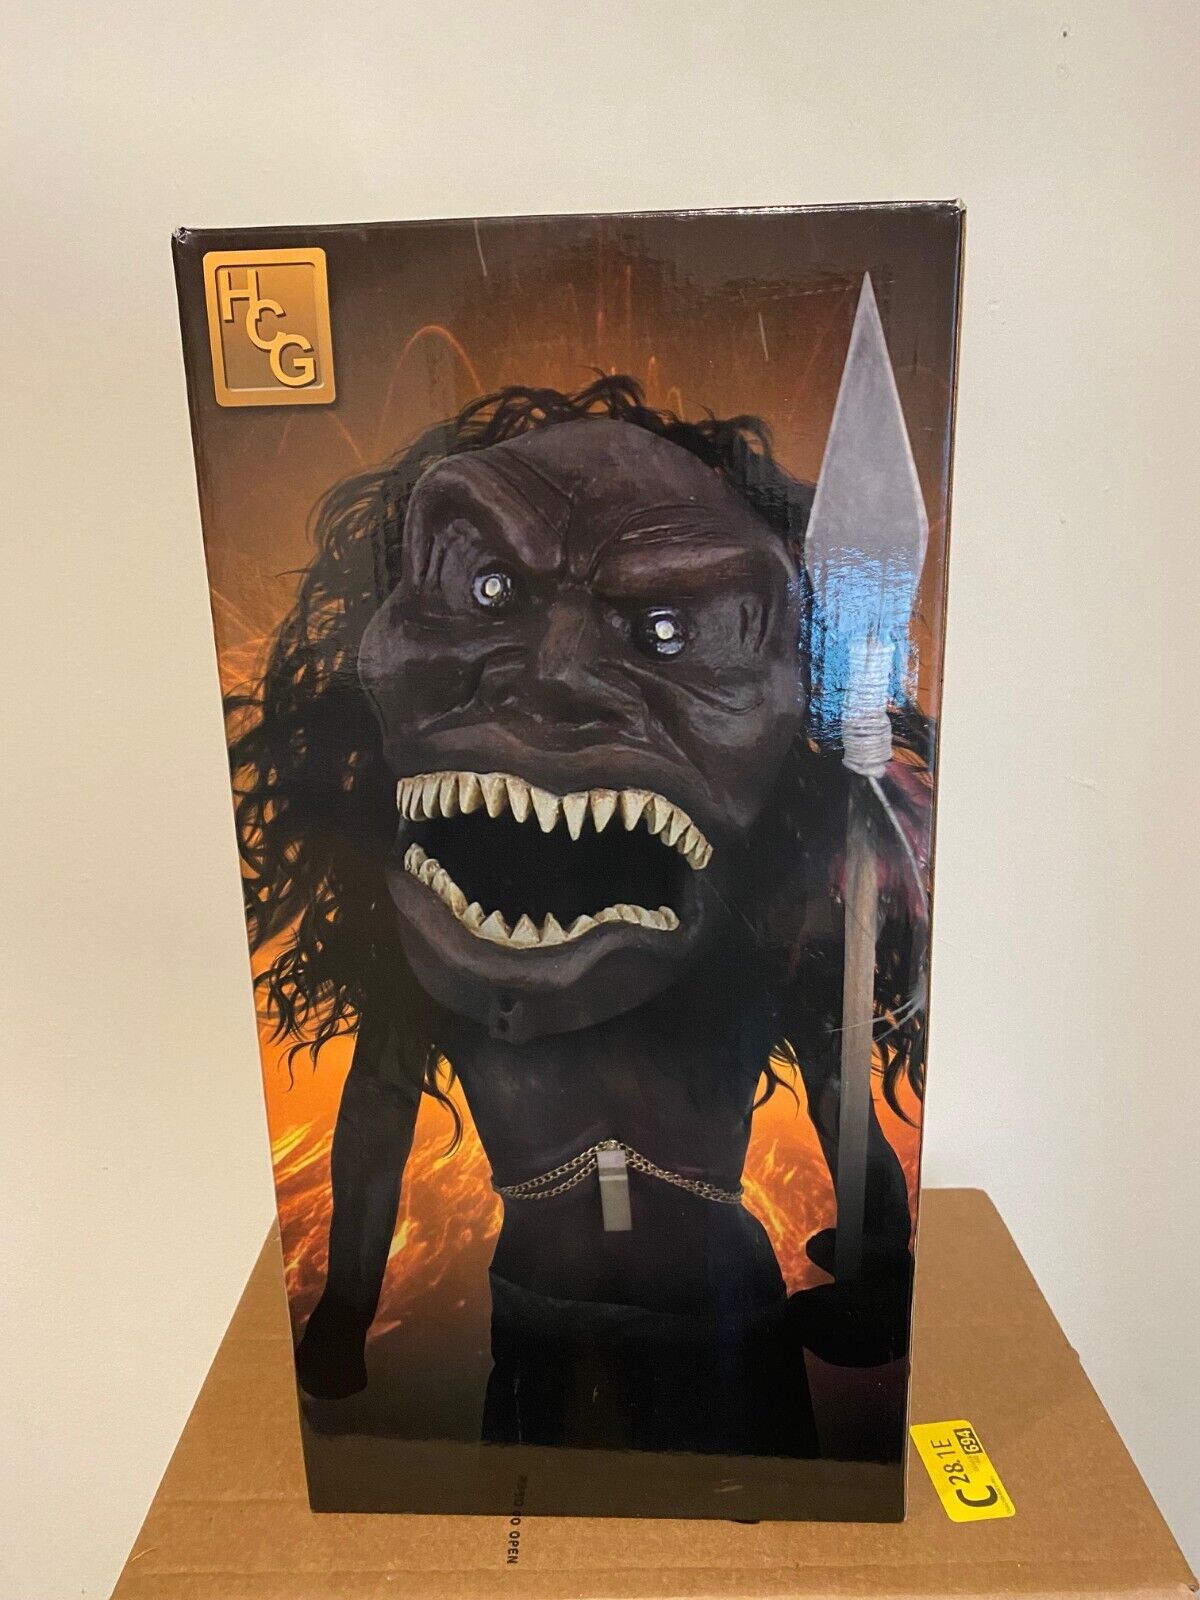 TRILOGY OF TERROR ZUNI WARRIOR PROP REPLICA BY HCG, USED, OPENED BOX